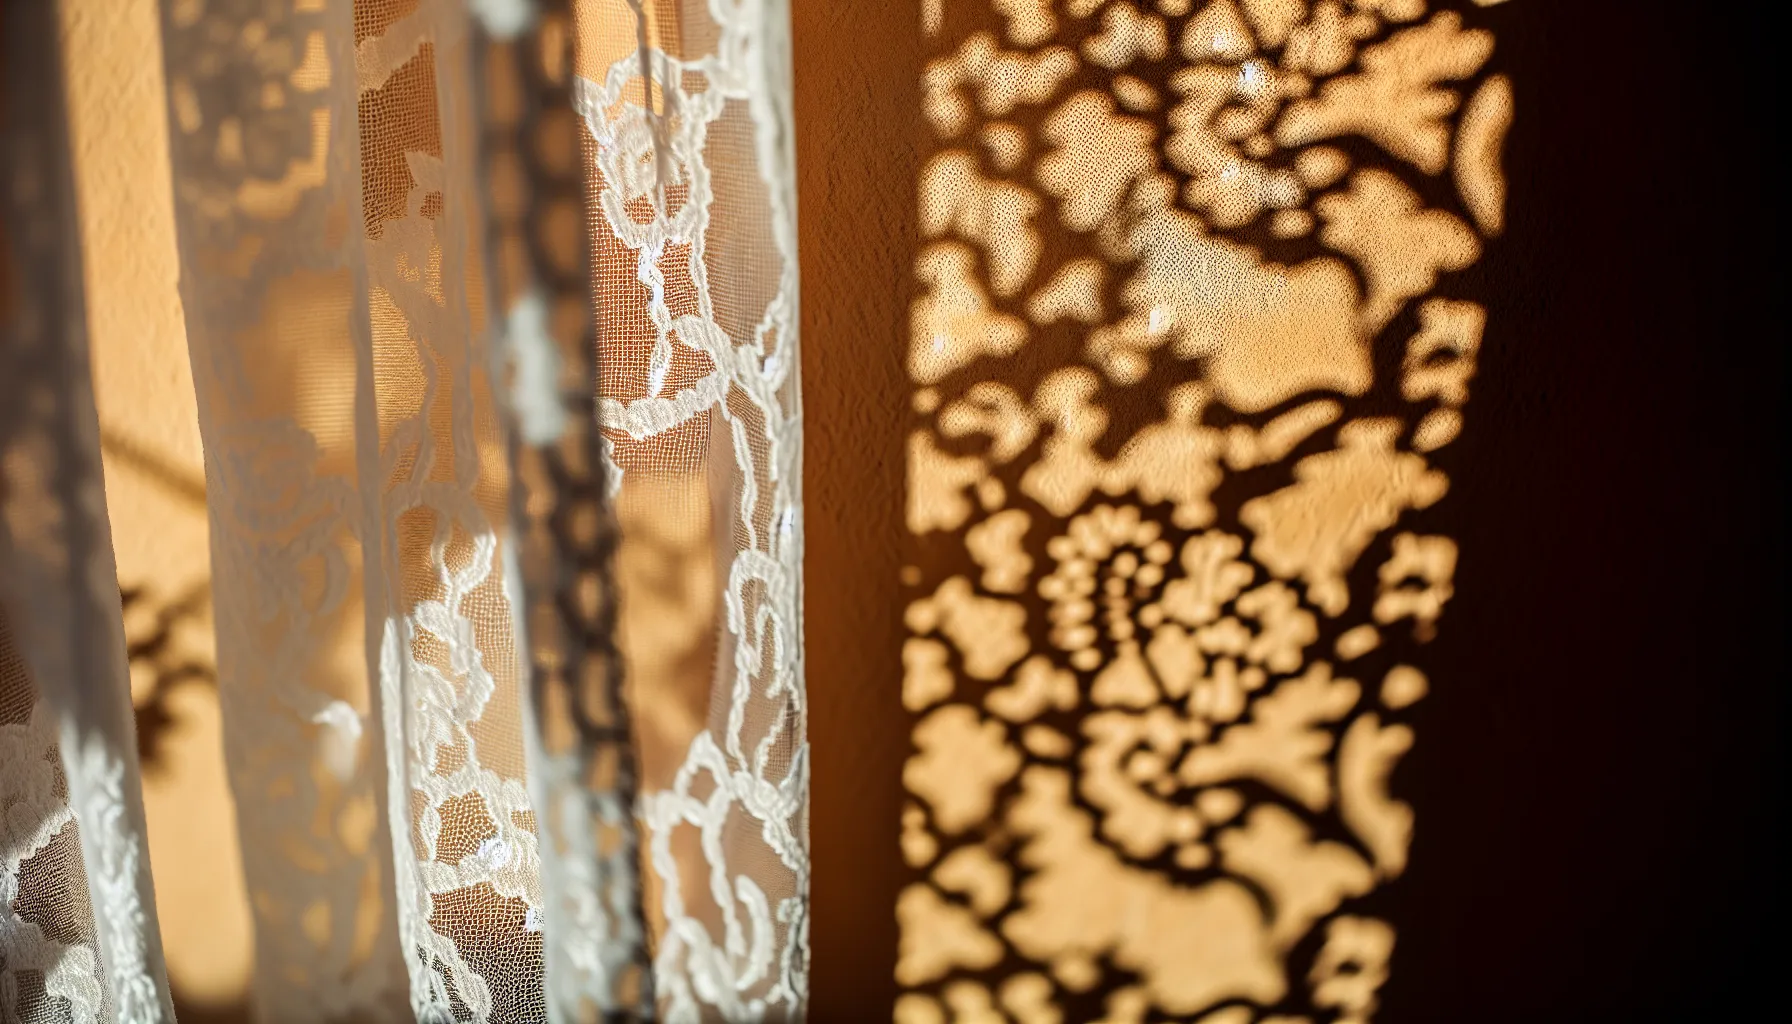 Suggestive image of lace curtains